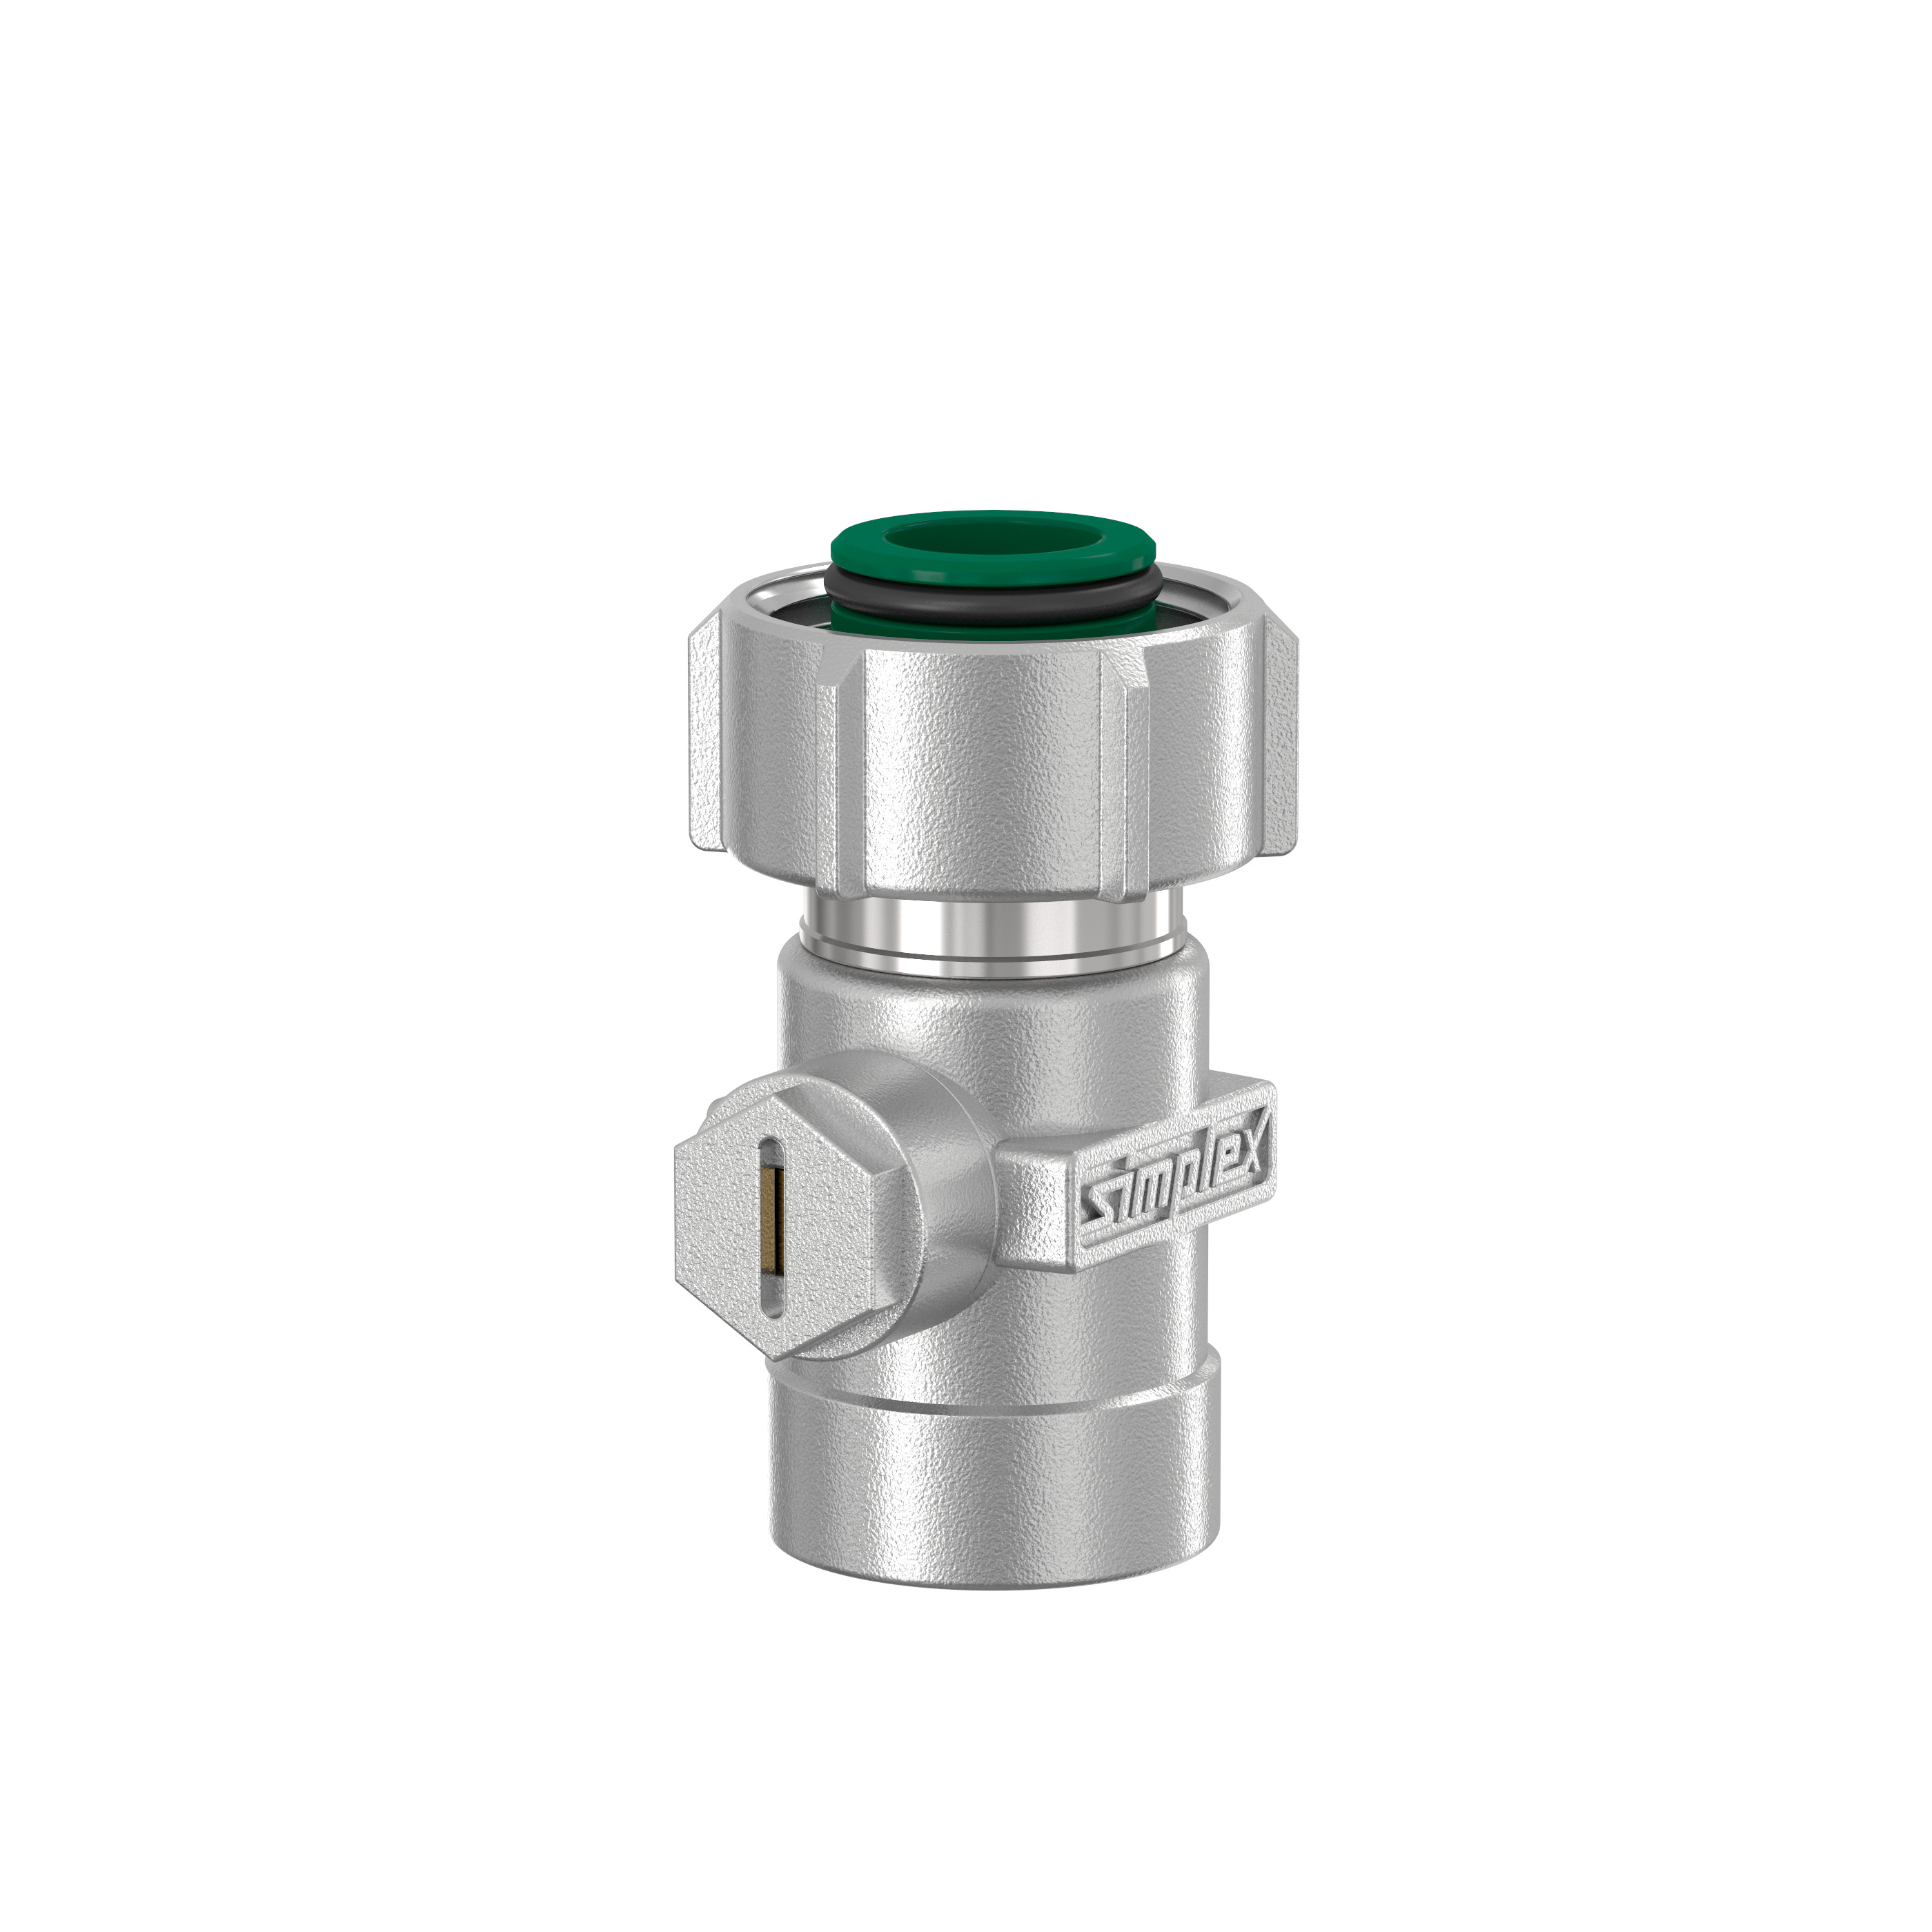 Exclusiv Single Valve with Cone Inserts and Female Thread